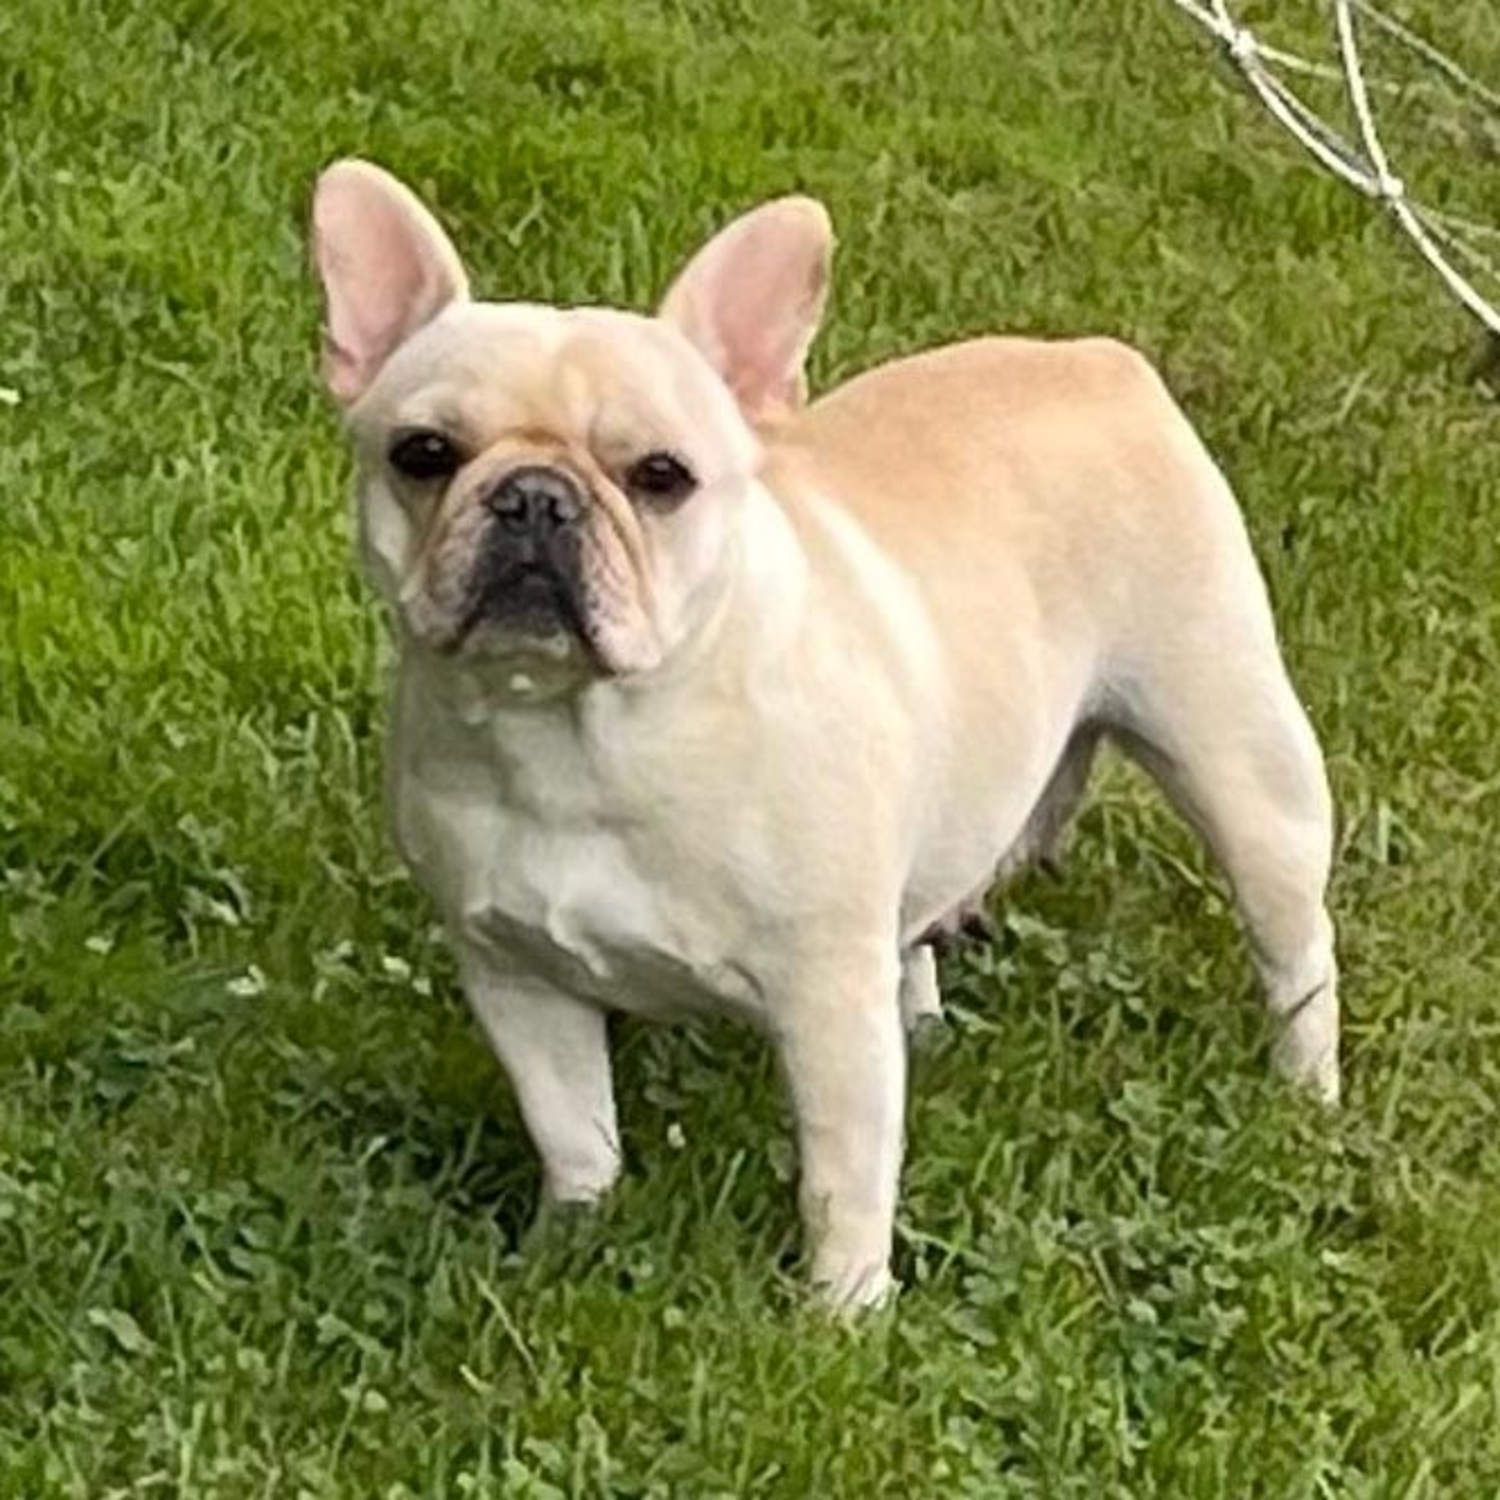 French bulldog died in scorching delivery truck after it was stolen by FedEx driver, authorities say